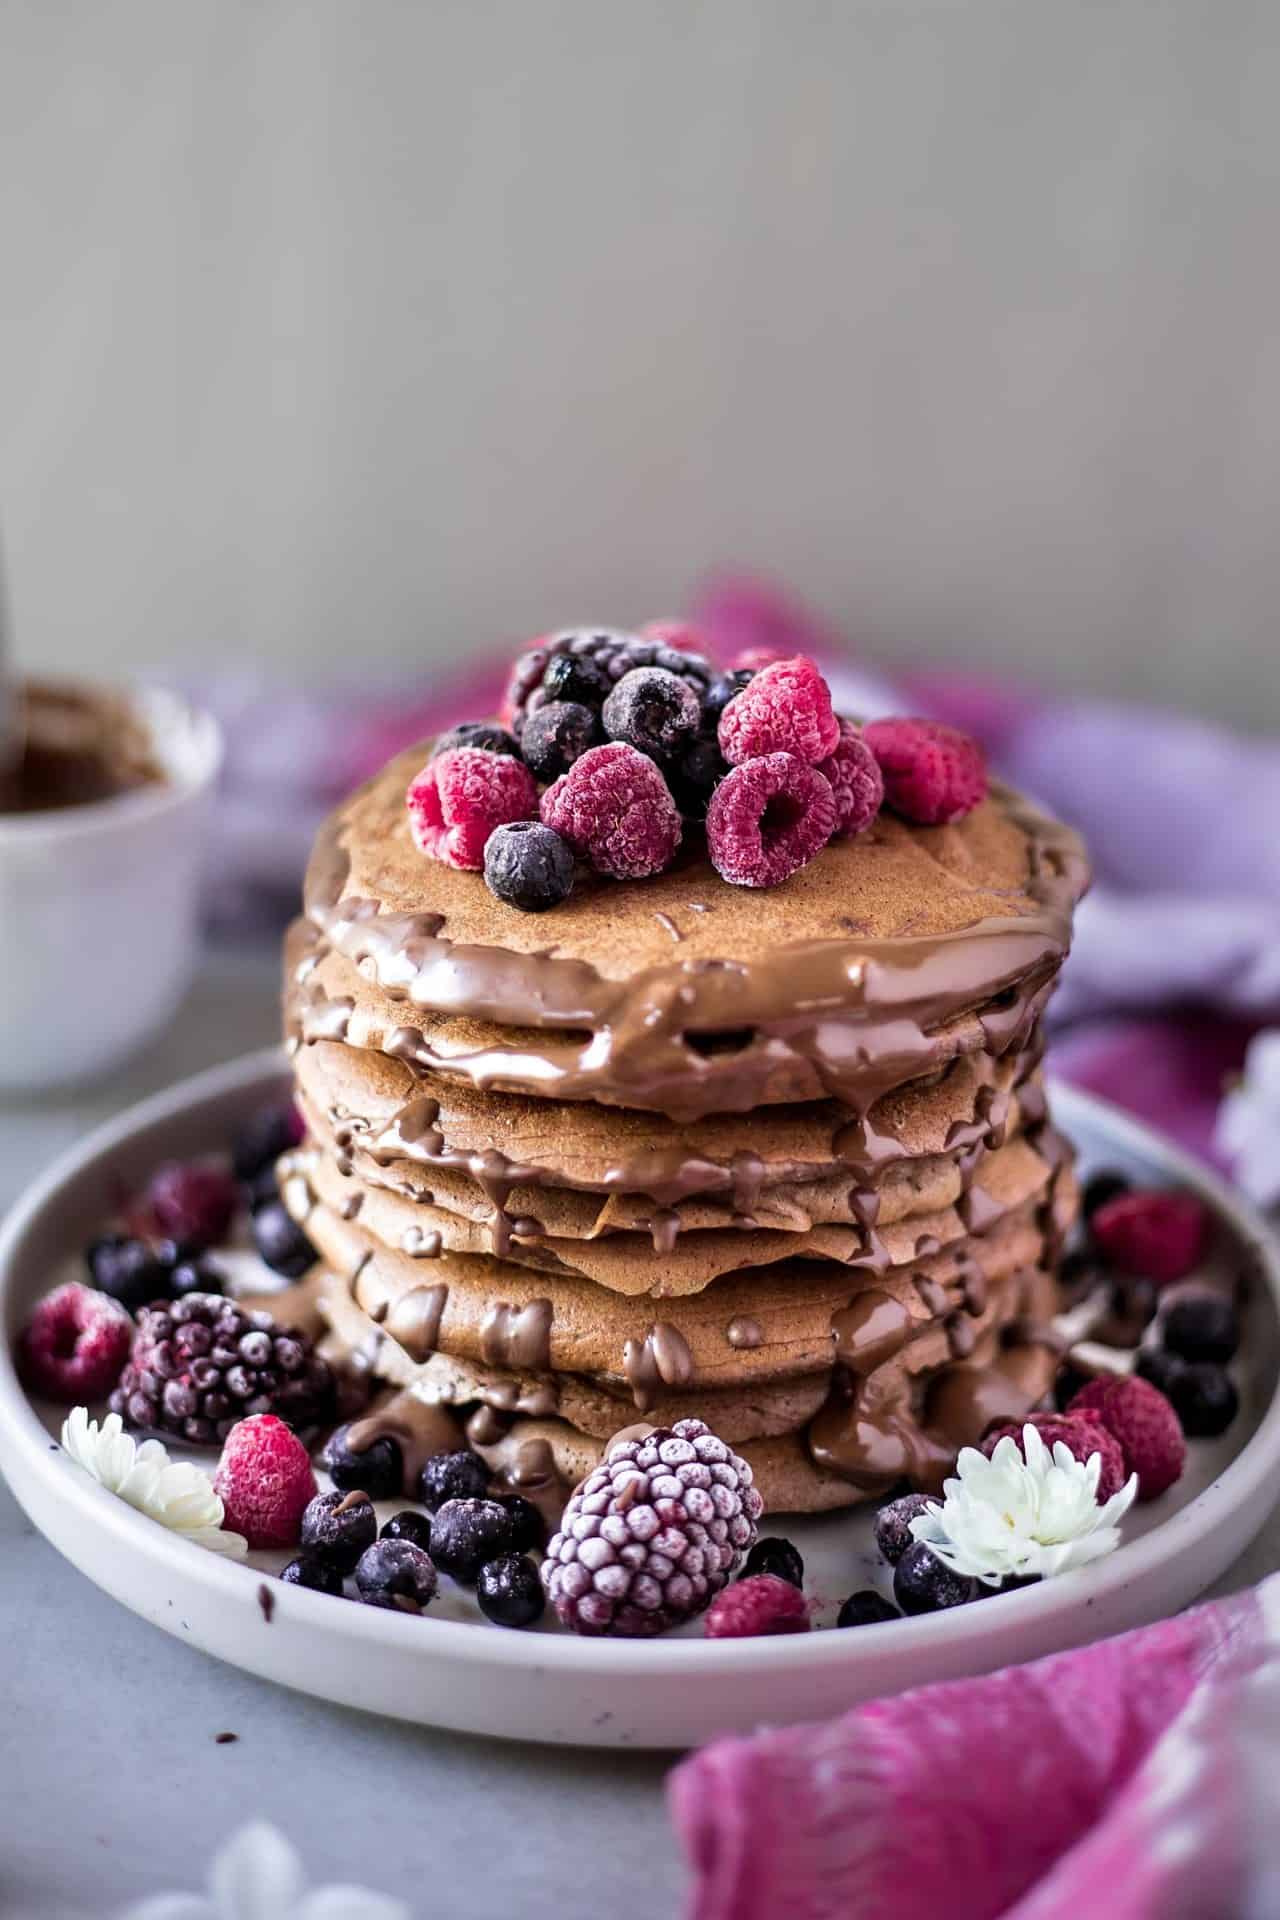 These gluten free chocolate banana pancakes are vegan and low FODMAP. They are so fluffy, flavorful, chocolaty and super delicious.